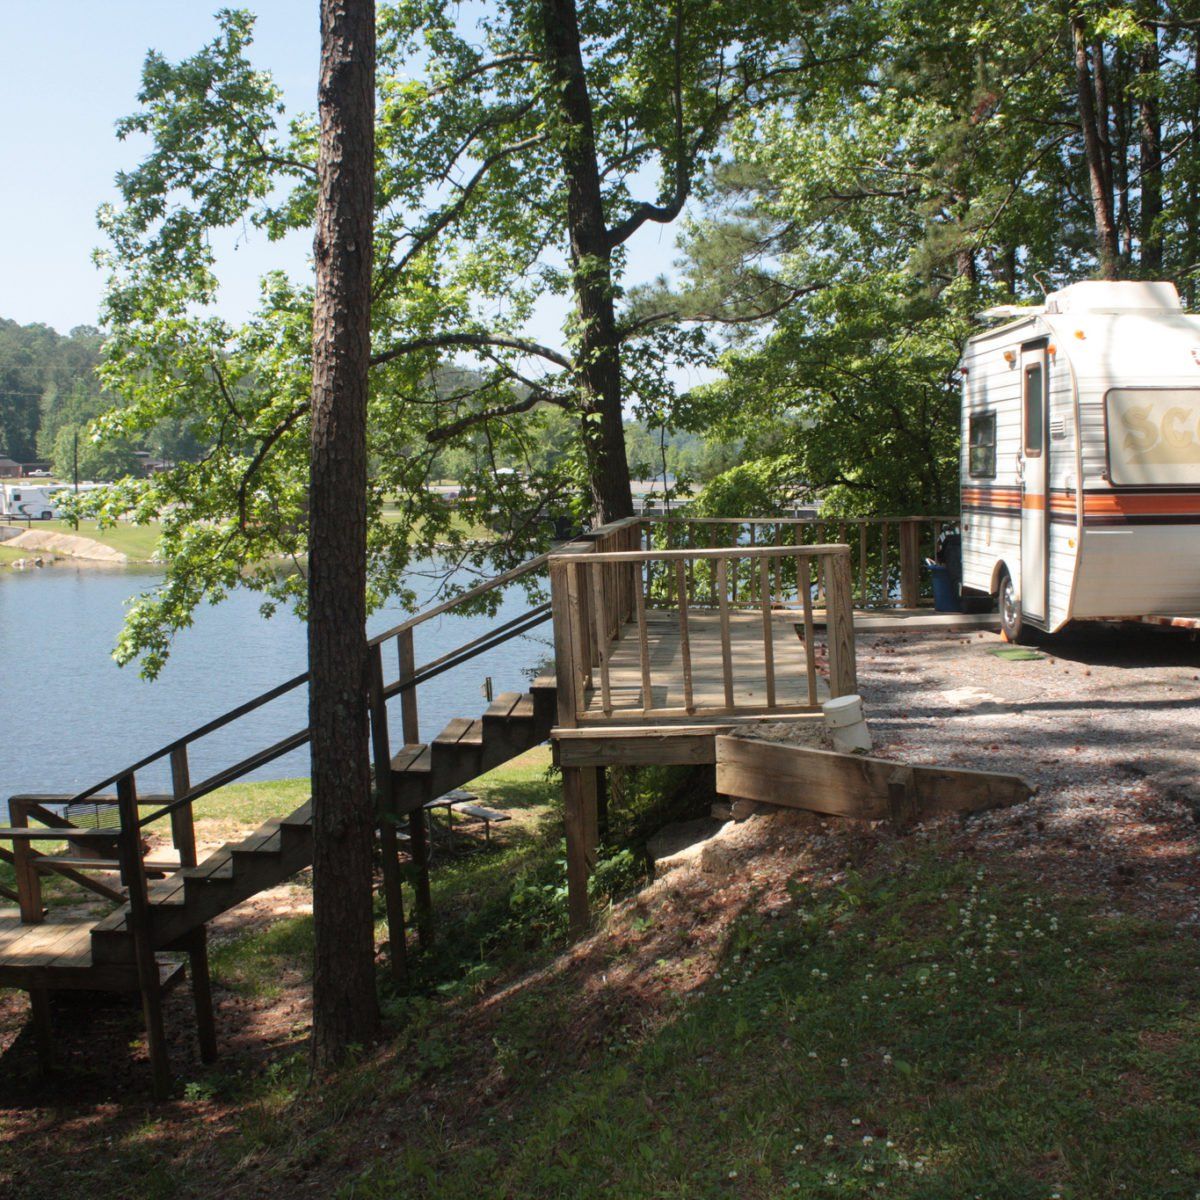 The Best RV Parks in Every State